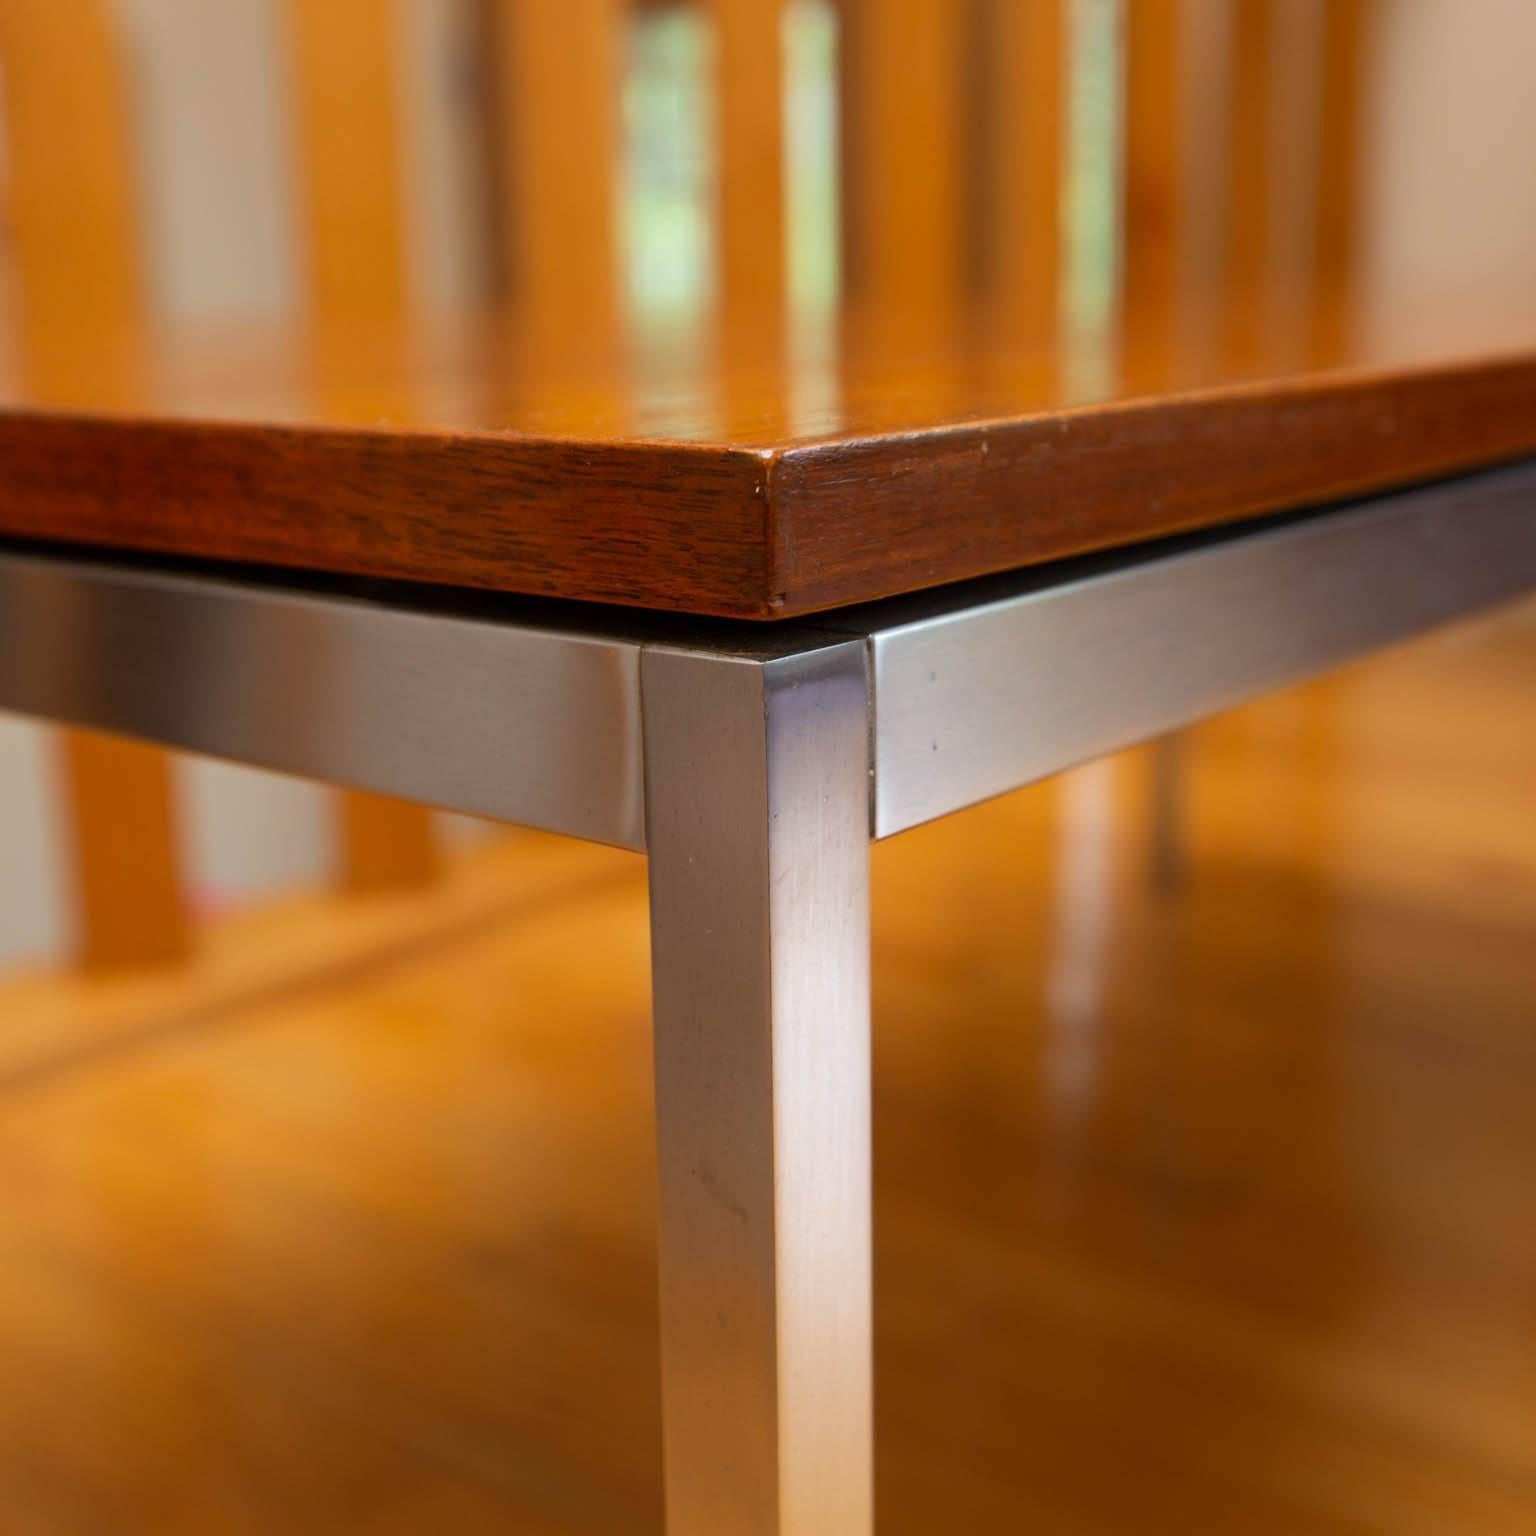 Walnut coffee table on brushed aluminum base. Part of a matched set that is being offered for the first time since the original owners first purchased in 1962.